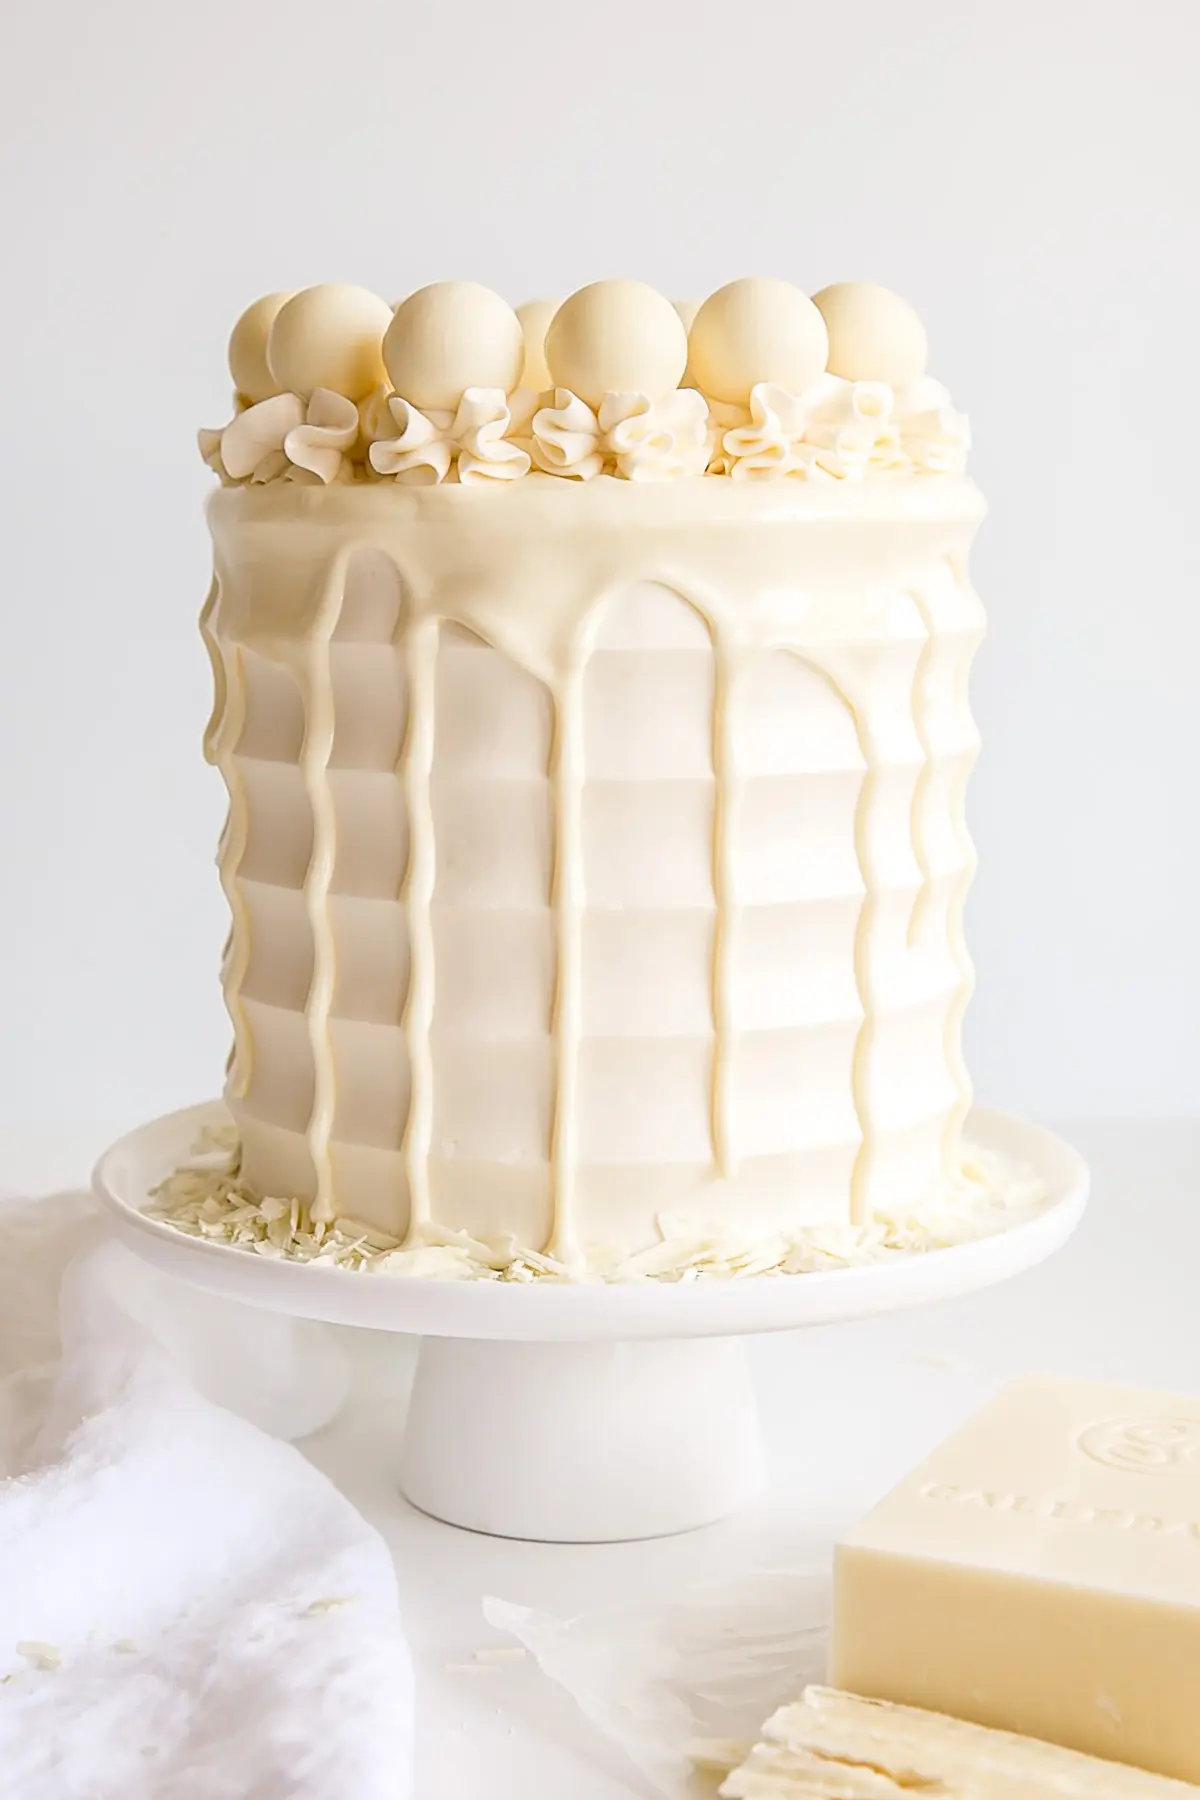 Classic white chocolate cake with scalloped sides, a ganache drip, and truffles on top.